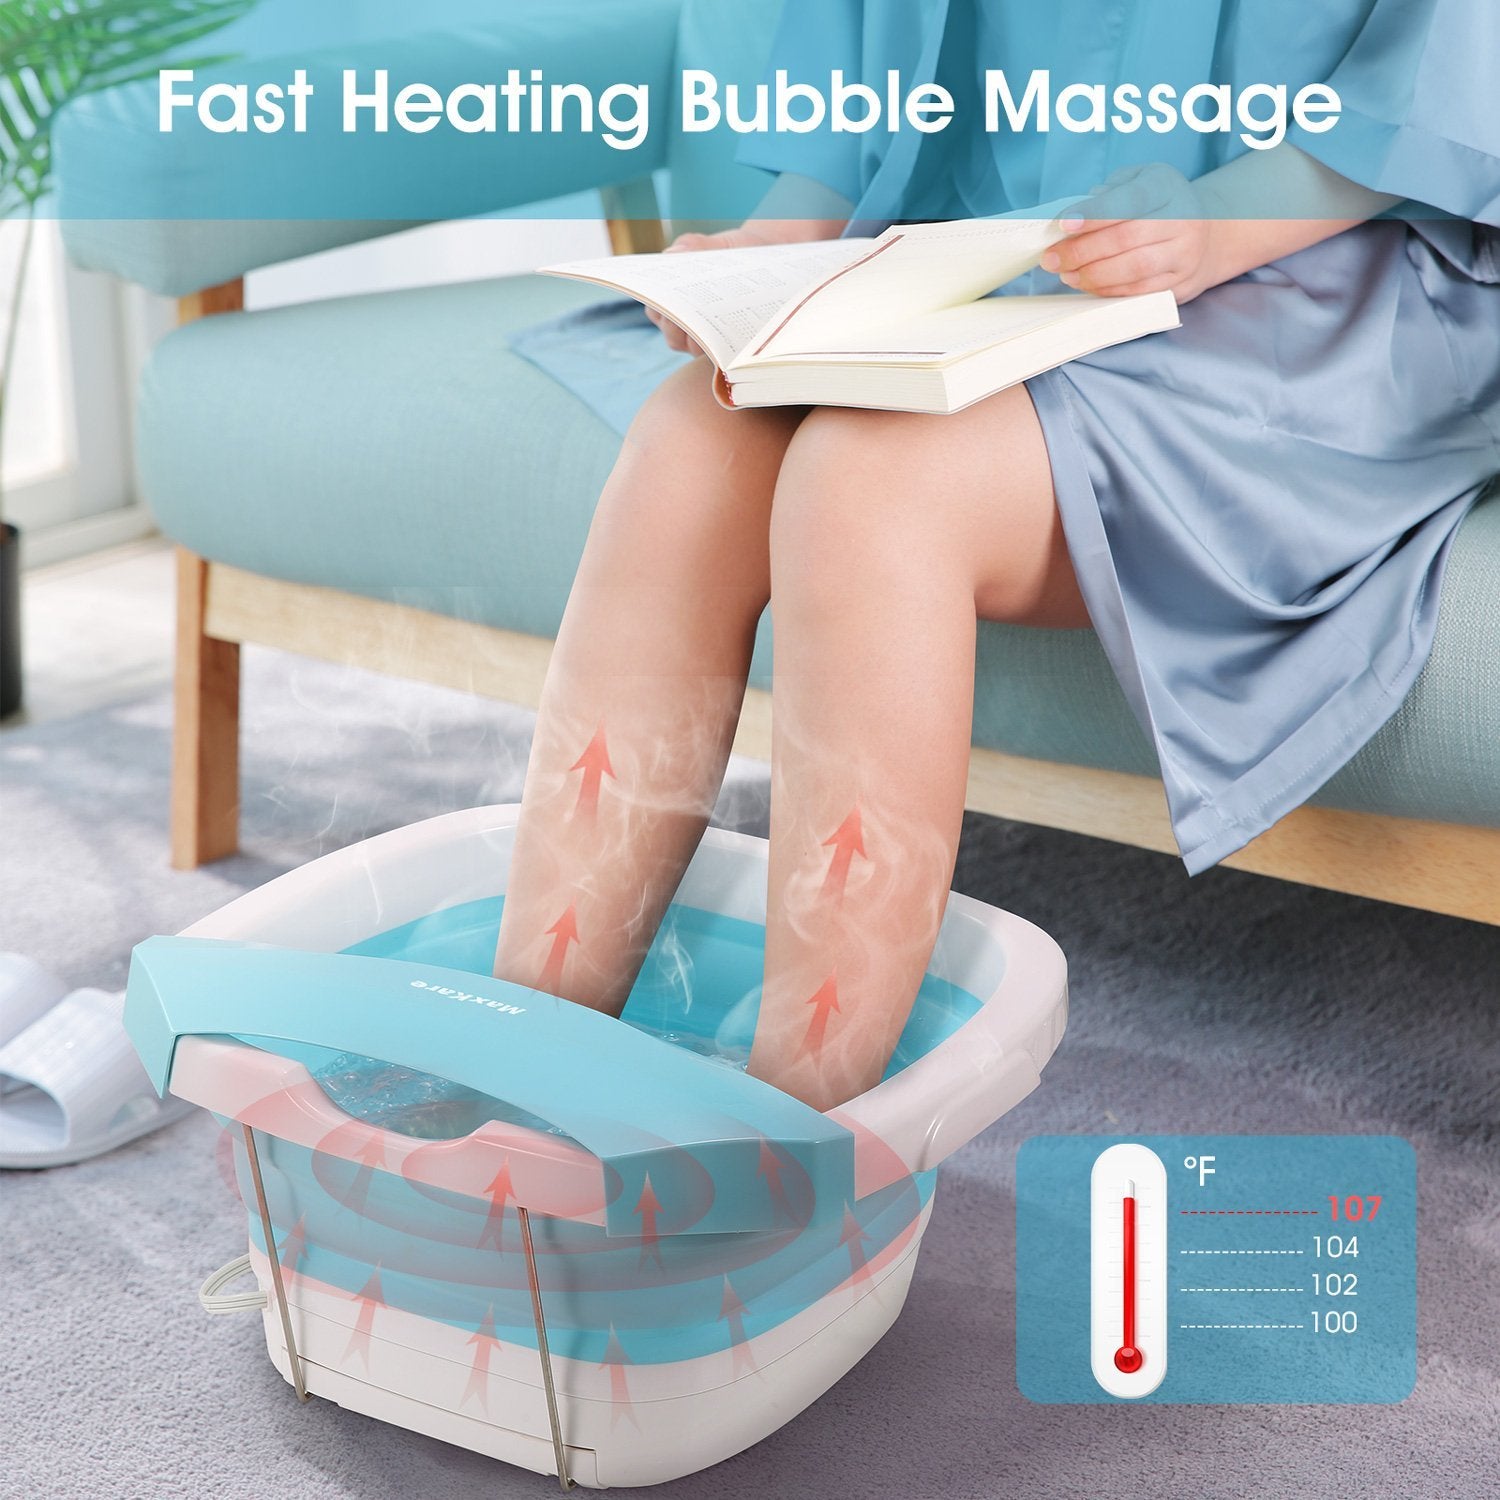 Load image into Gallery viewer, Foot Spa Bath Massager with Collapsible Design, Fast Heating with Bubbles Massage Function, Easy Storage, Foldable Foot Soaking Tub for Feet - NAIPO
